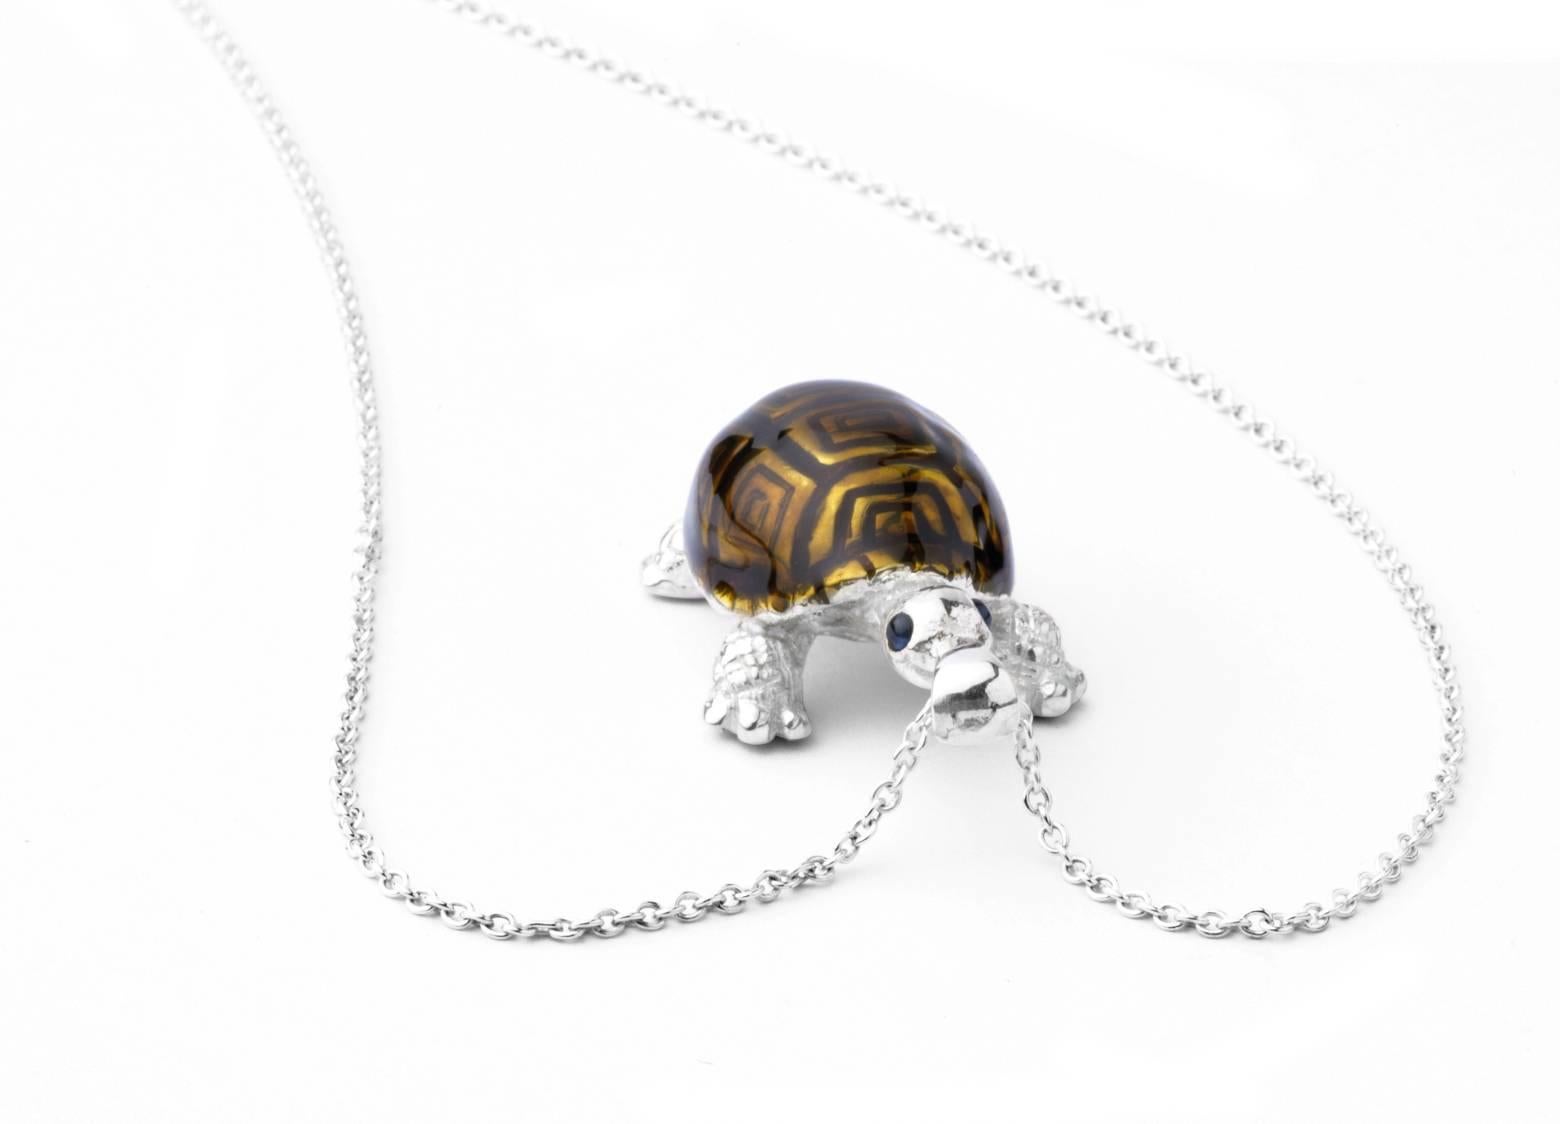 The sterling silver tortoise pendant has a brown enamel finish and is fitted on to a 15